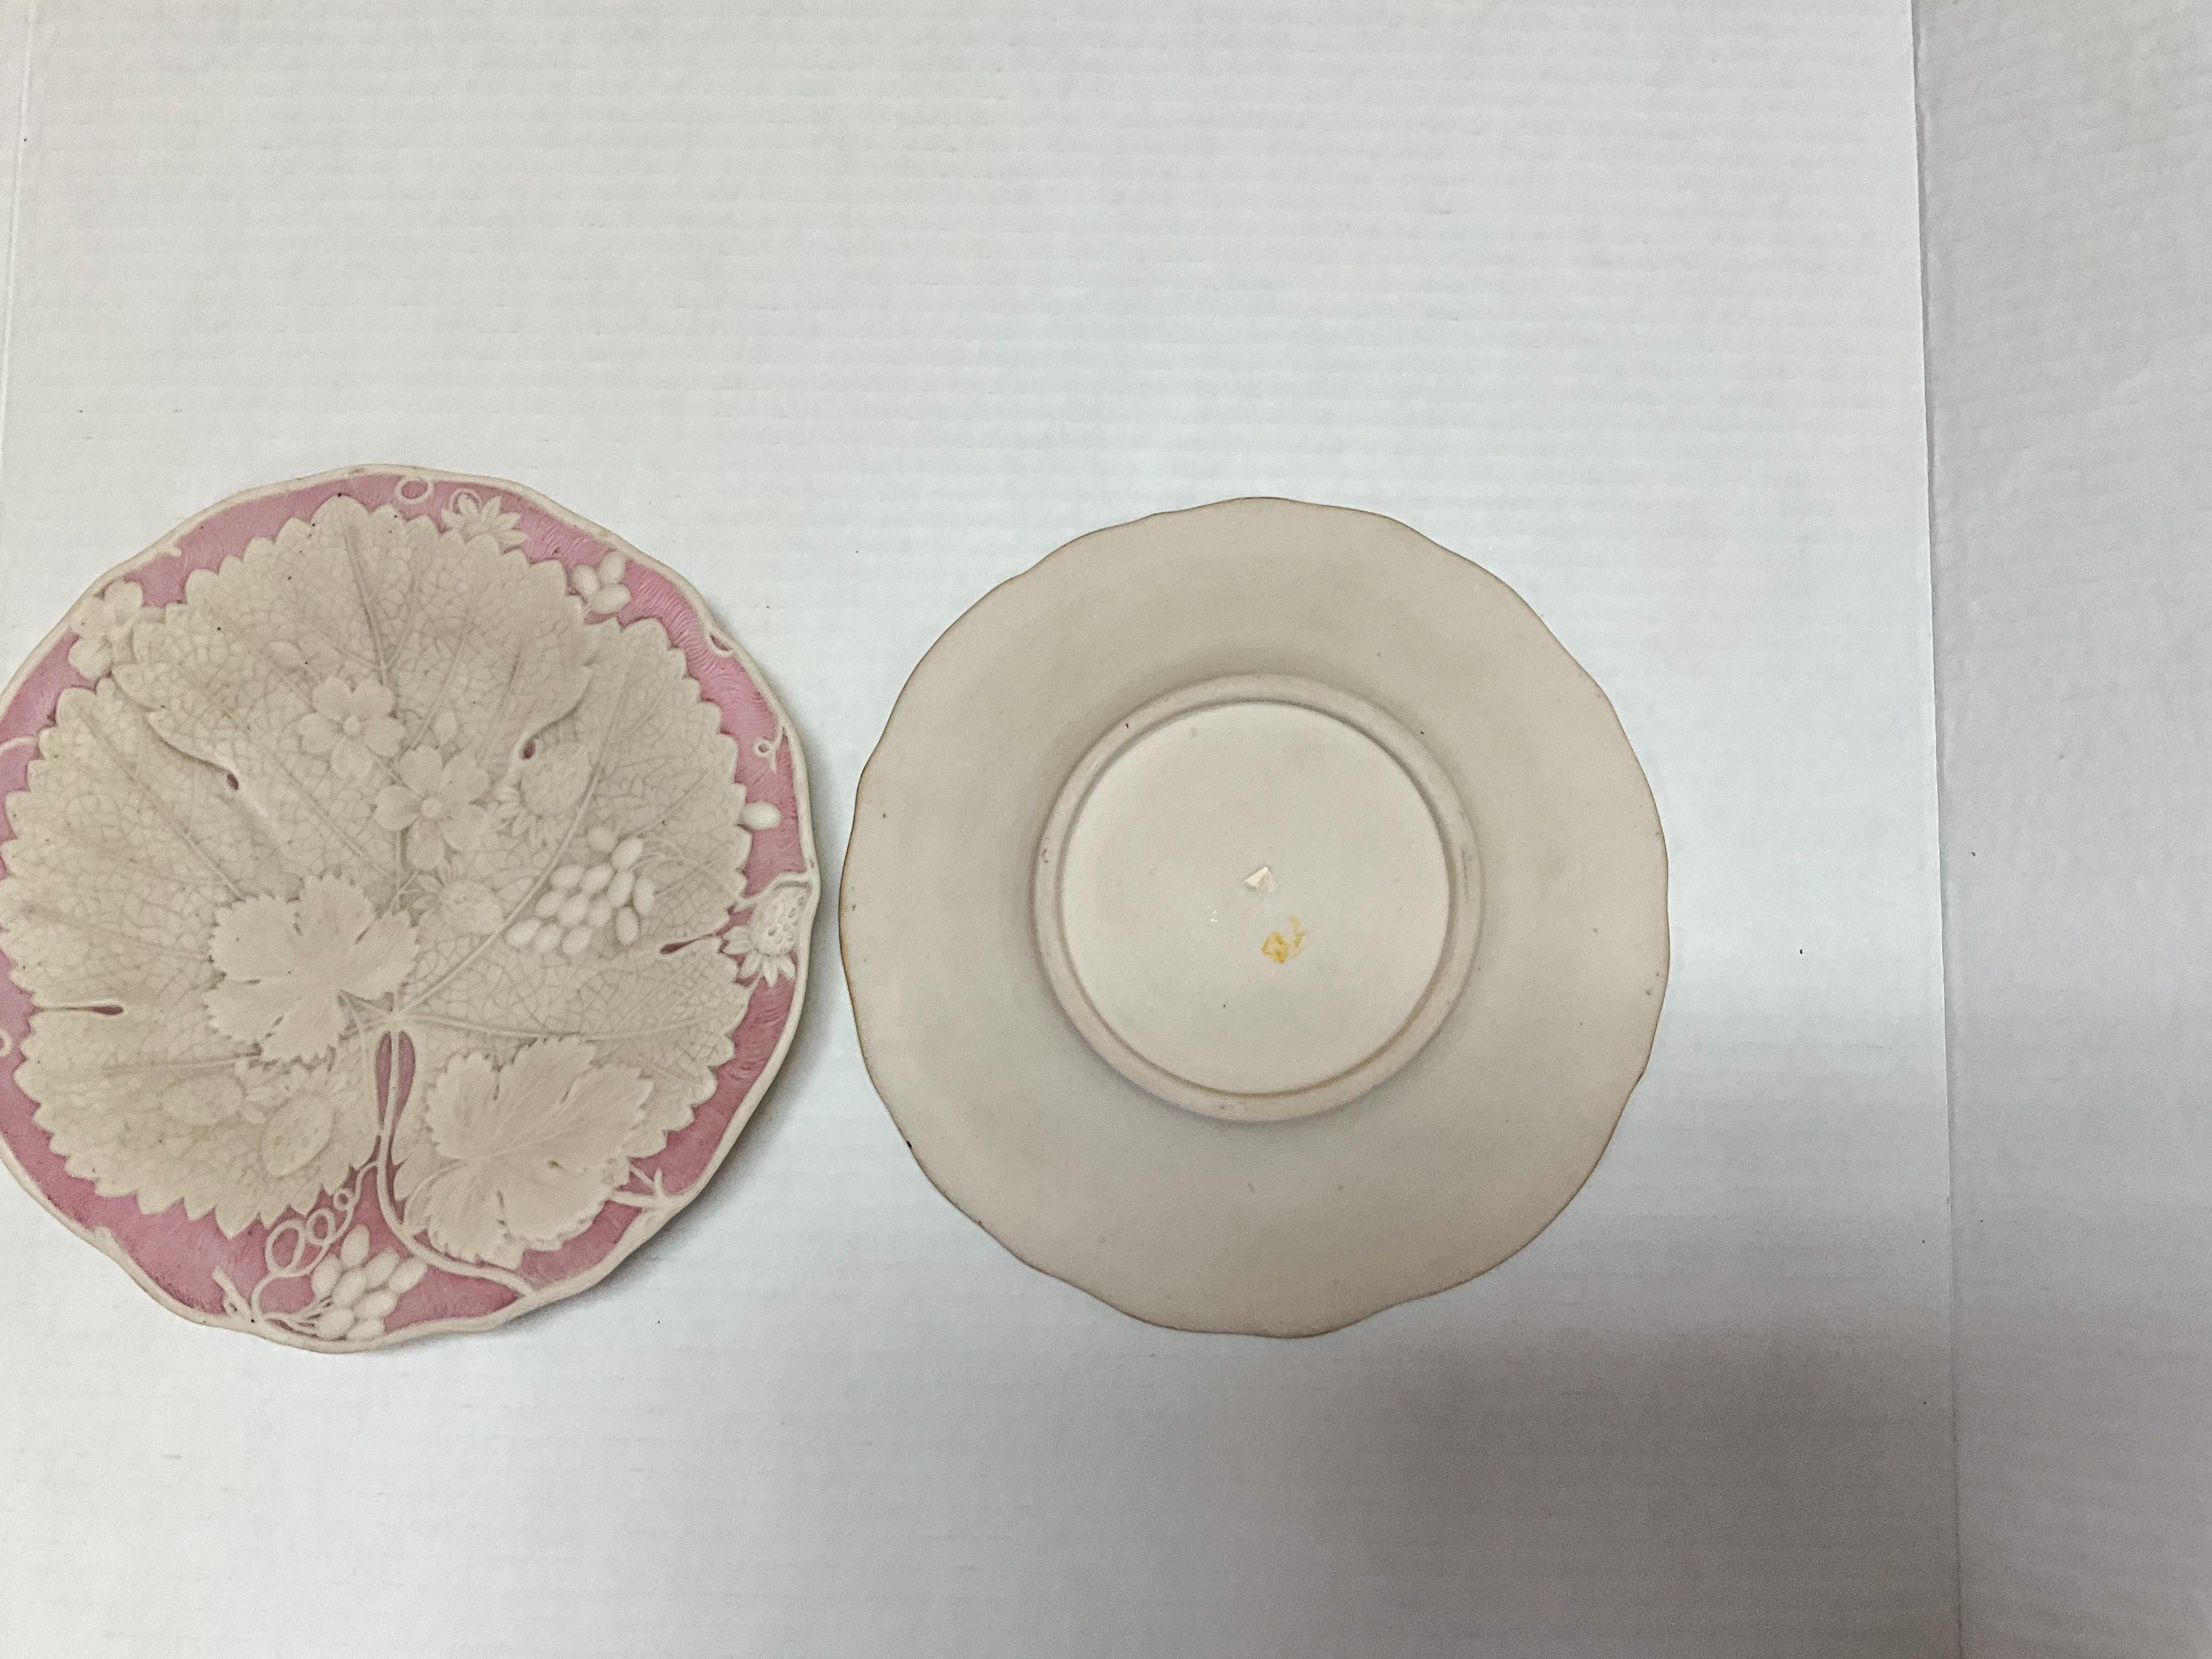 This is a lovely set of English pink and white basalt glaze decorative plates in the manner of Wedgwood. They appear to depict some sort of begonia leaf. The plates are unmarked and date to the later part of the 19th century.  One plate shows a bit